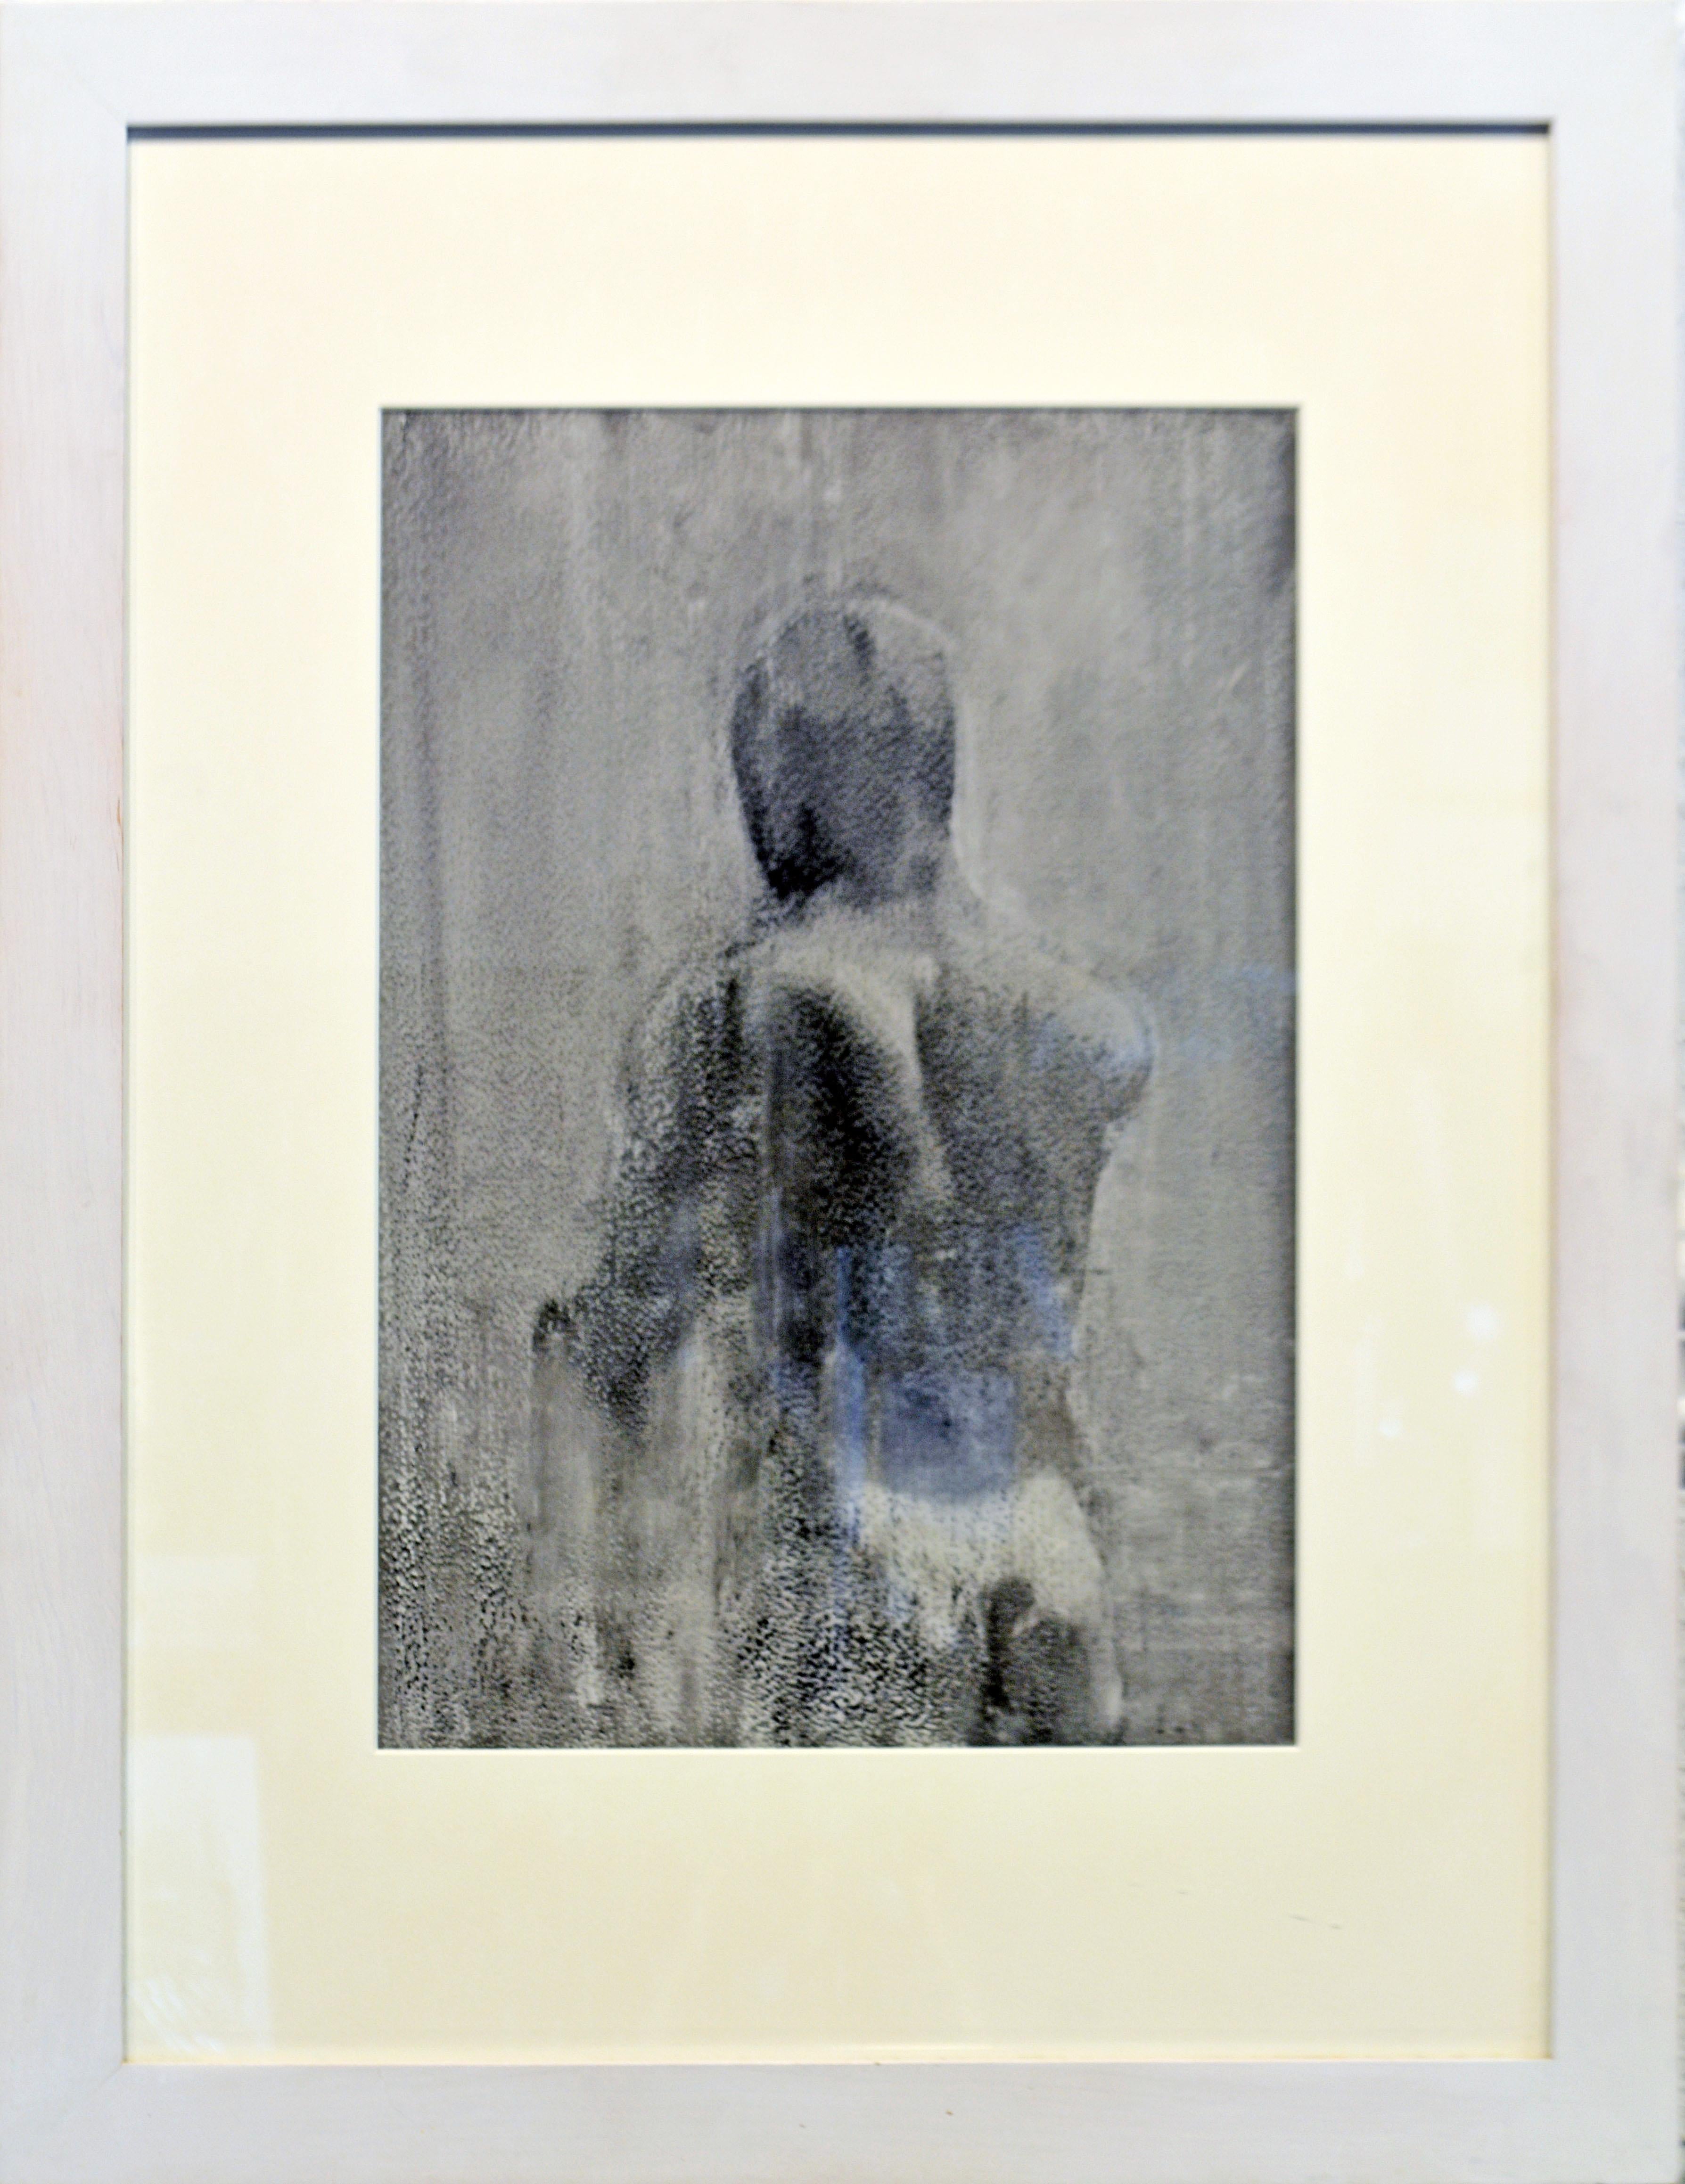 Michael David (American b. 1954)
'Small Shower III' 1998
Photo based ink on Mylar.
Signed by the artist, Inscribed on backing.
Image: 11 x 16 in / 28 x 40 cm. Frame: 20 x 26 in / 50 x 66 cm. Inspected out of frame.
Provenance: 'The Shower